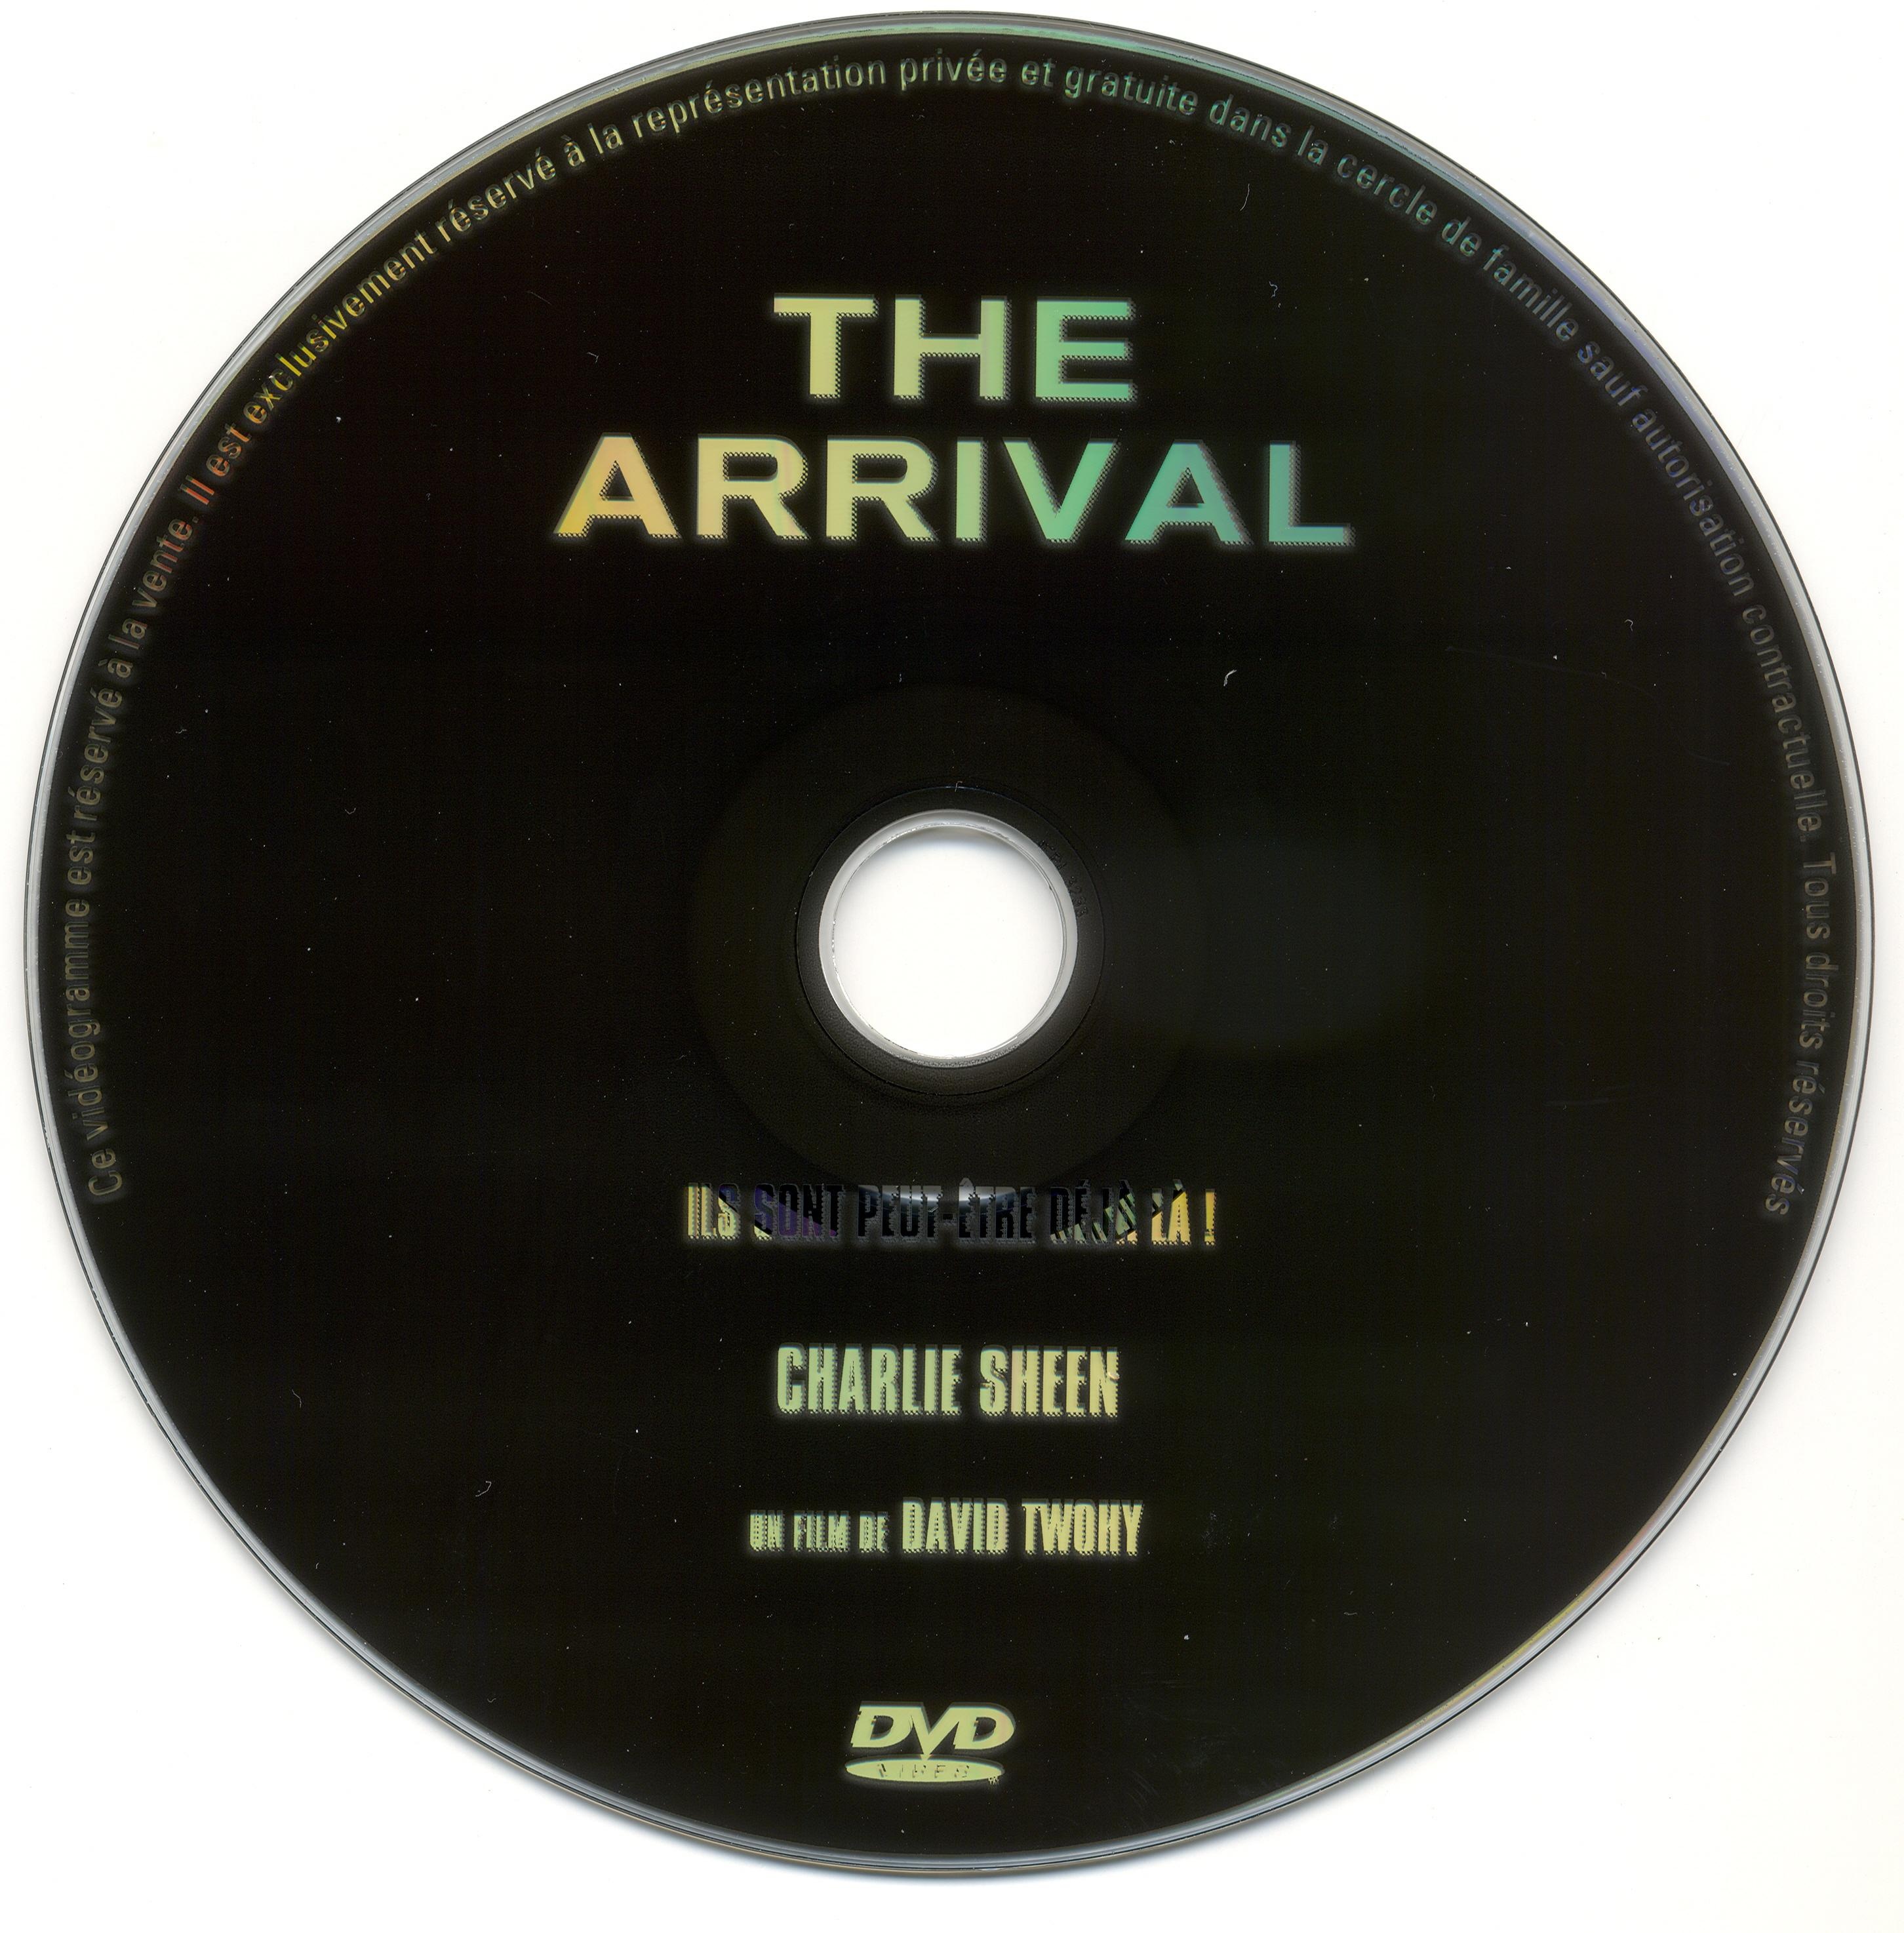 The arrival v2